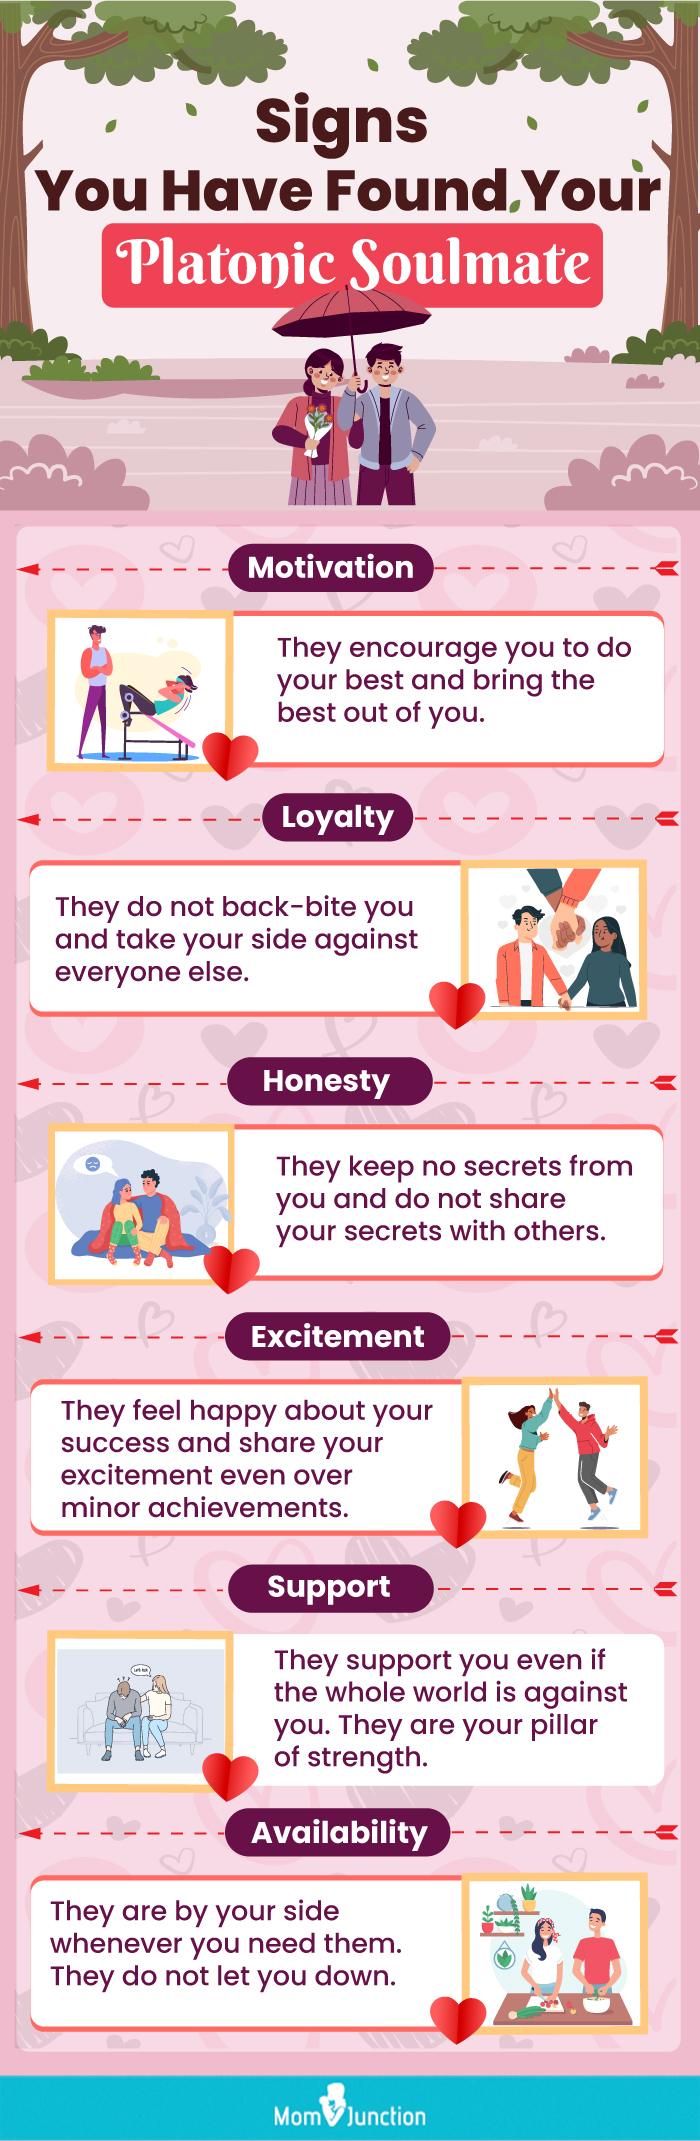 signs you have found your platonic soulmate (infographic)